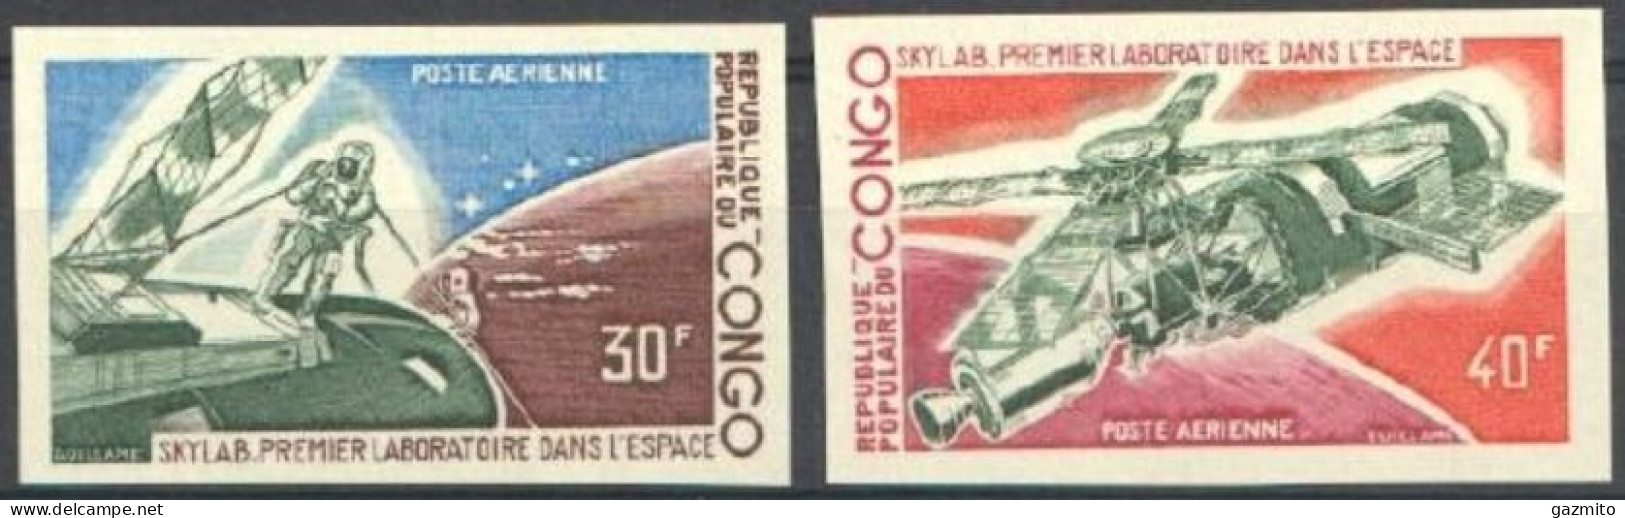 Congo Brazaville 1973, Airmail - Skylab Space Laboratory, 2val IMPERFORATED - Africa